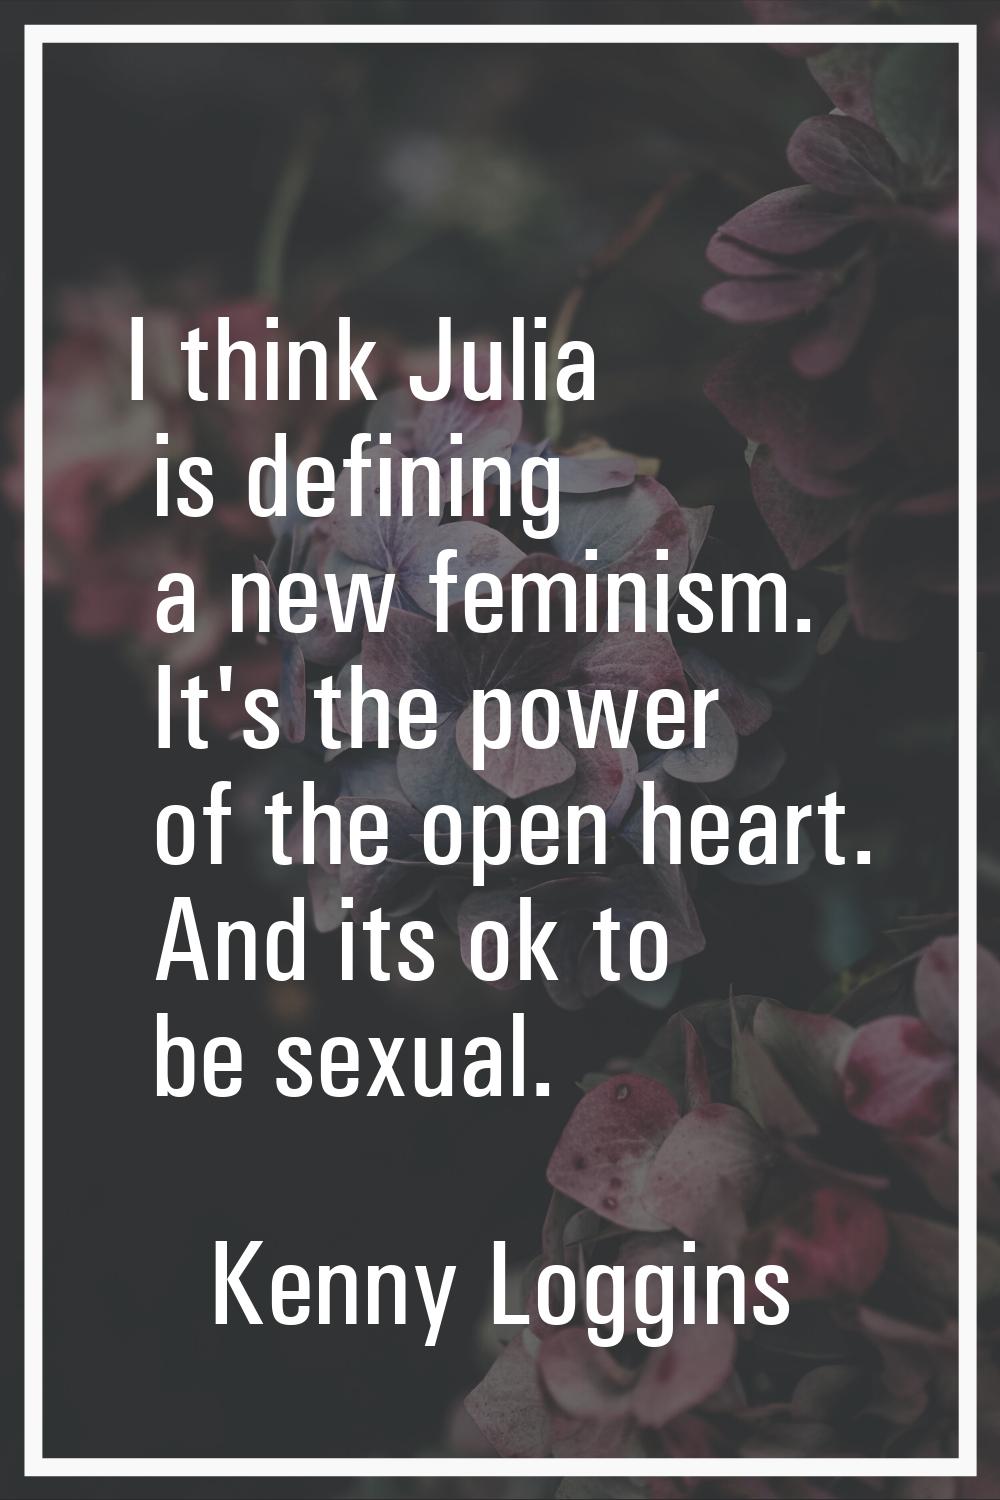 I think Julia is defining a new feminism. It's the power of the open heart. And its ok to be sexual